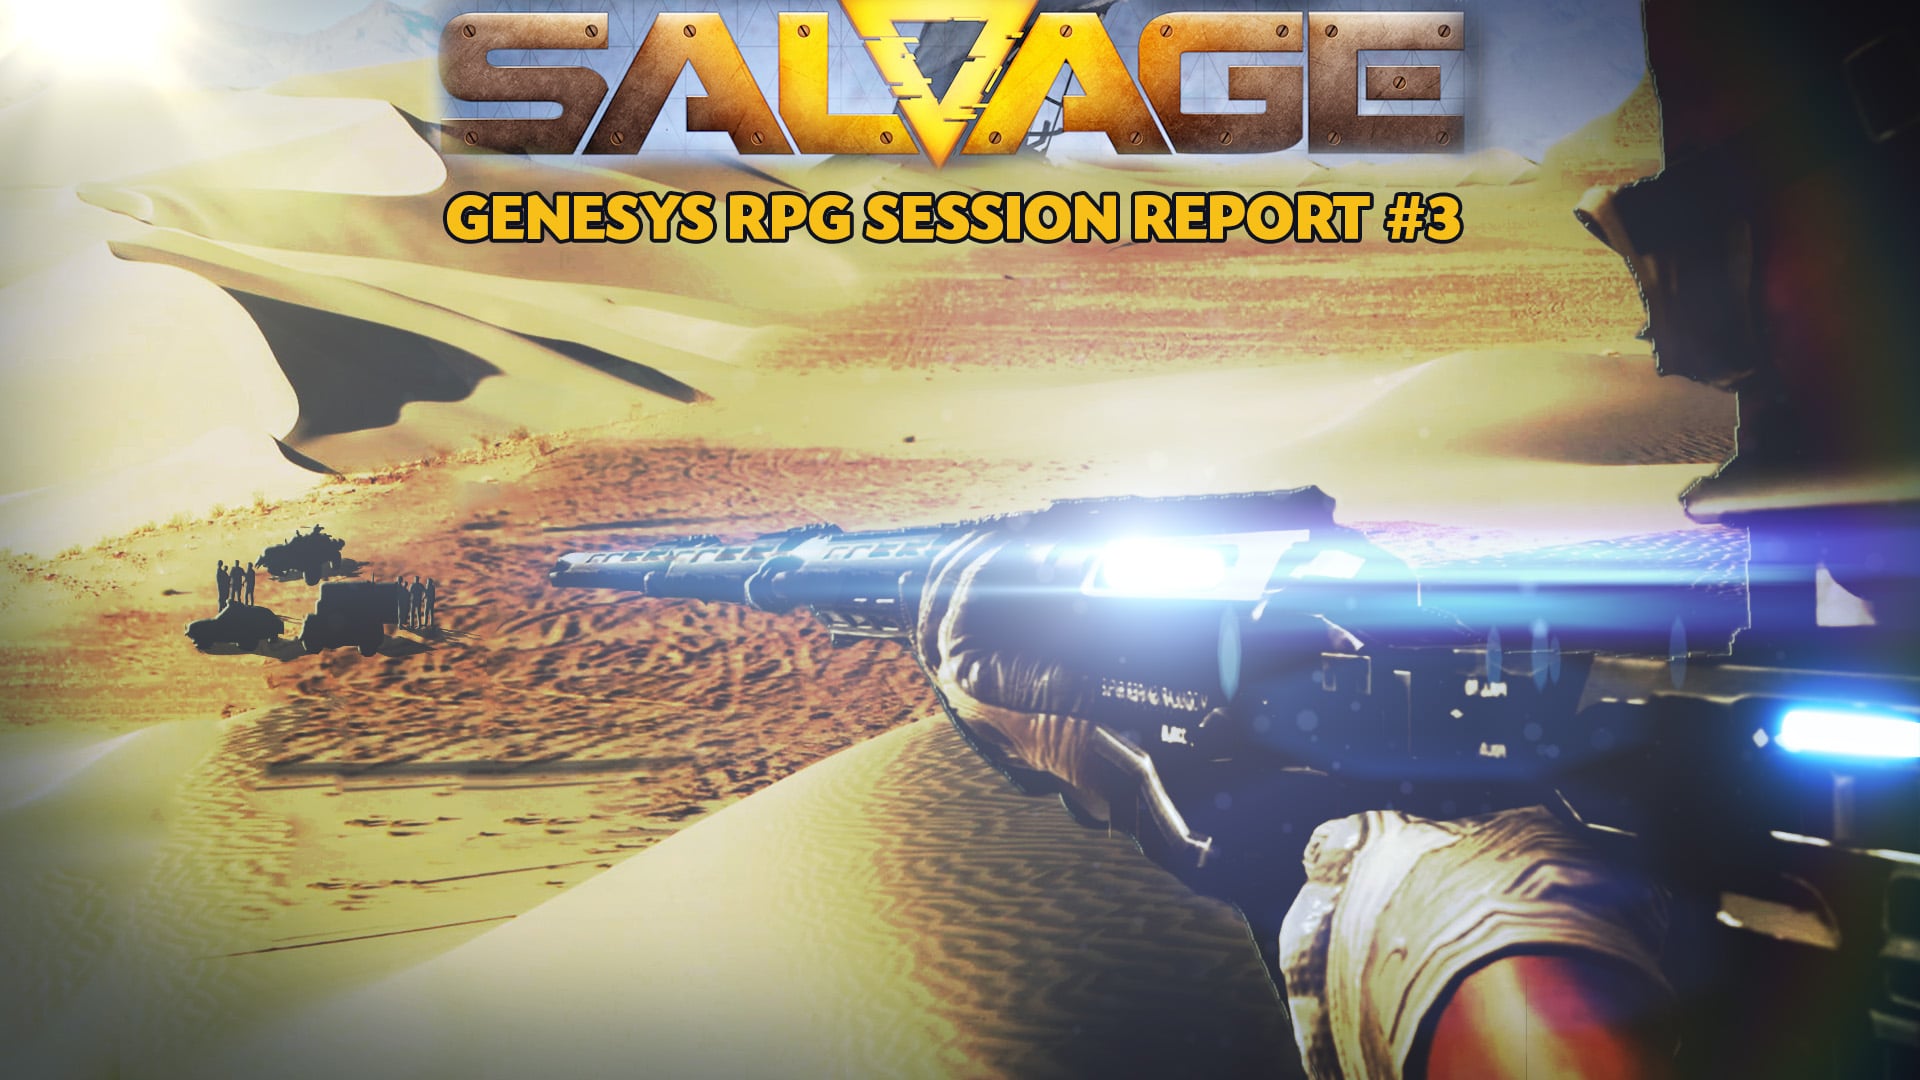 Salvage session 3 cover 03